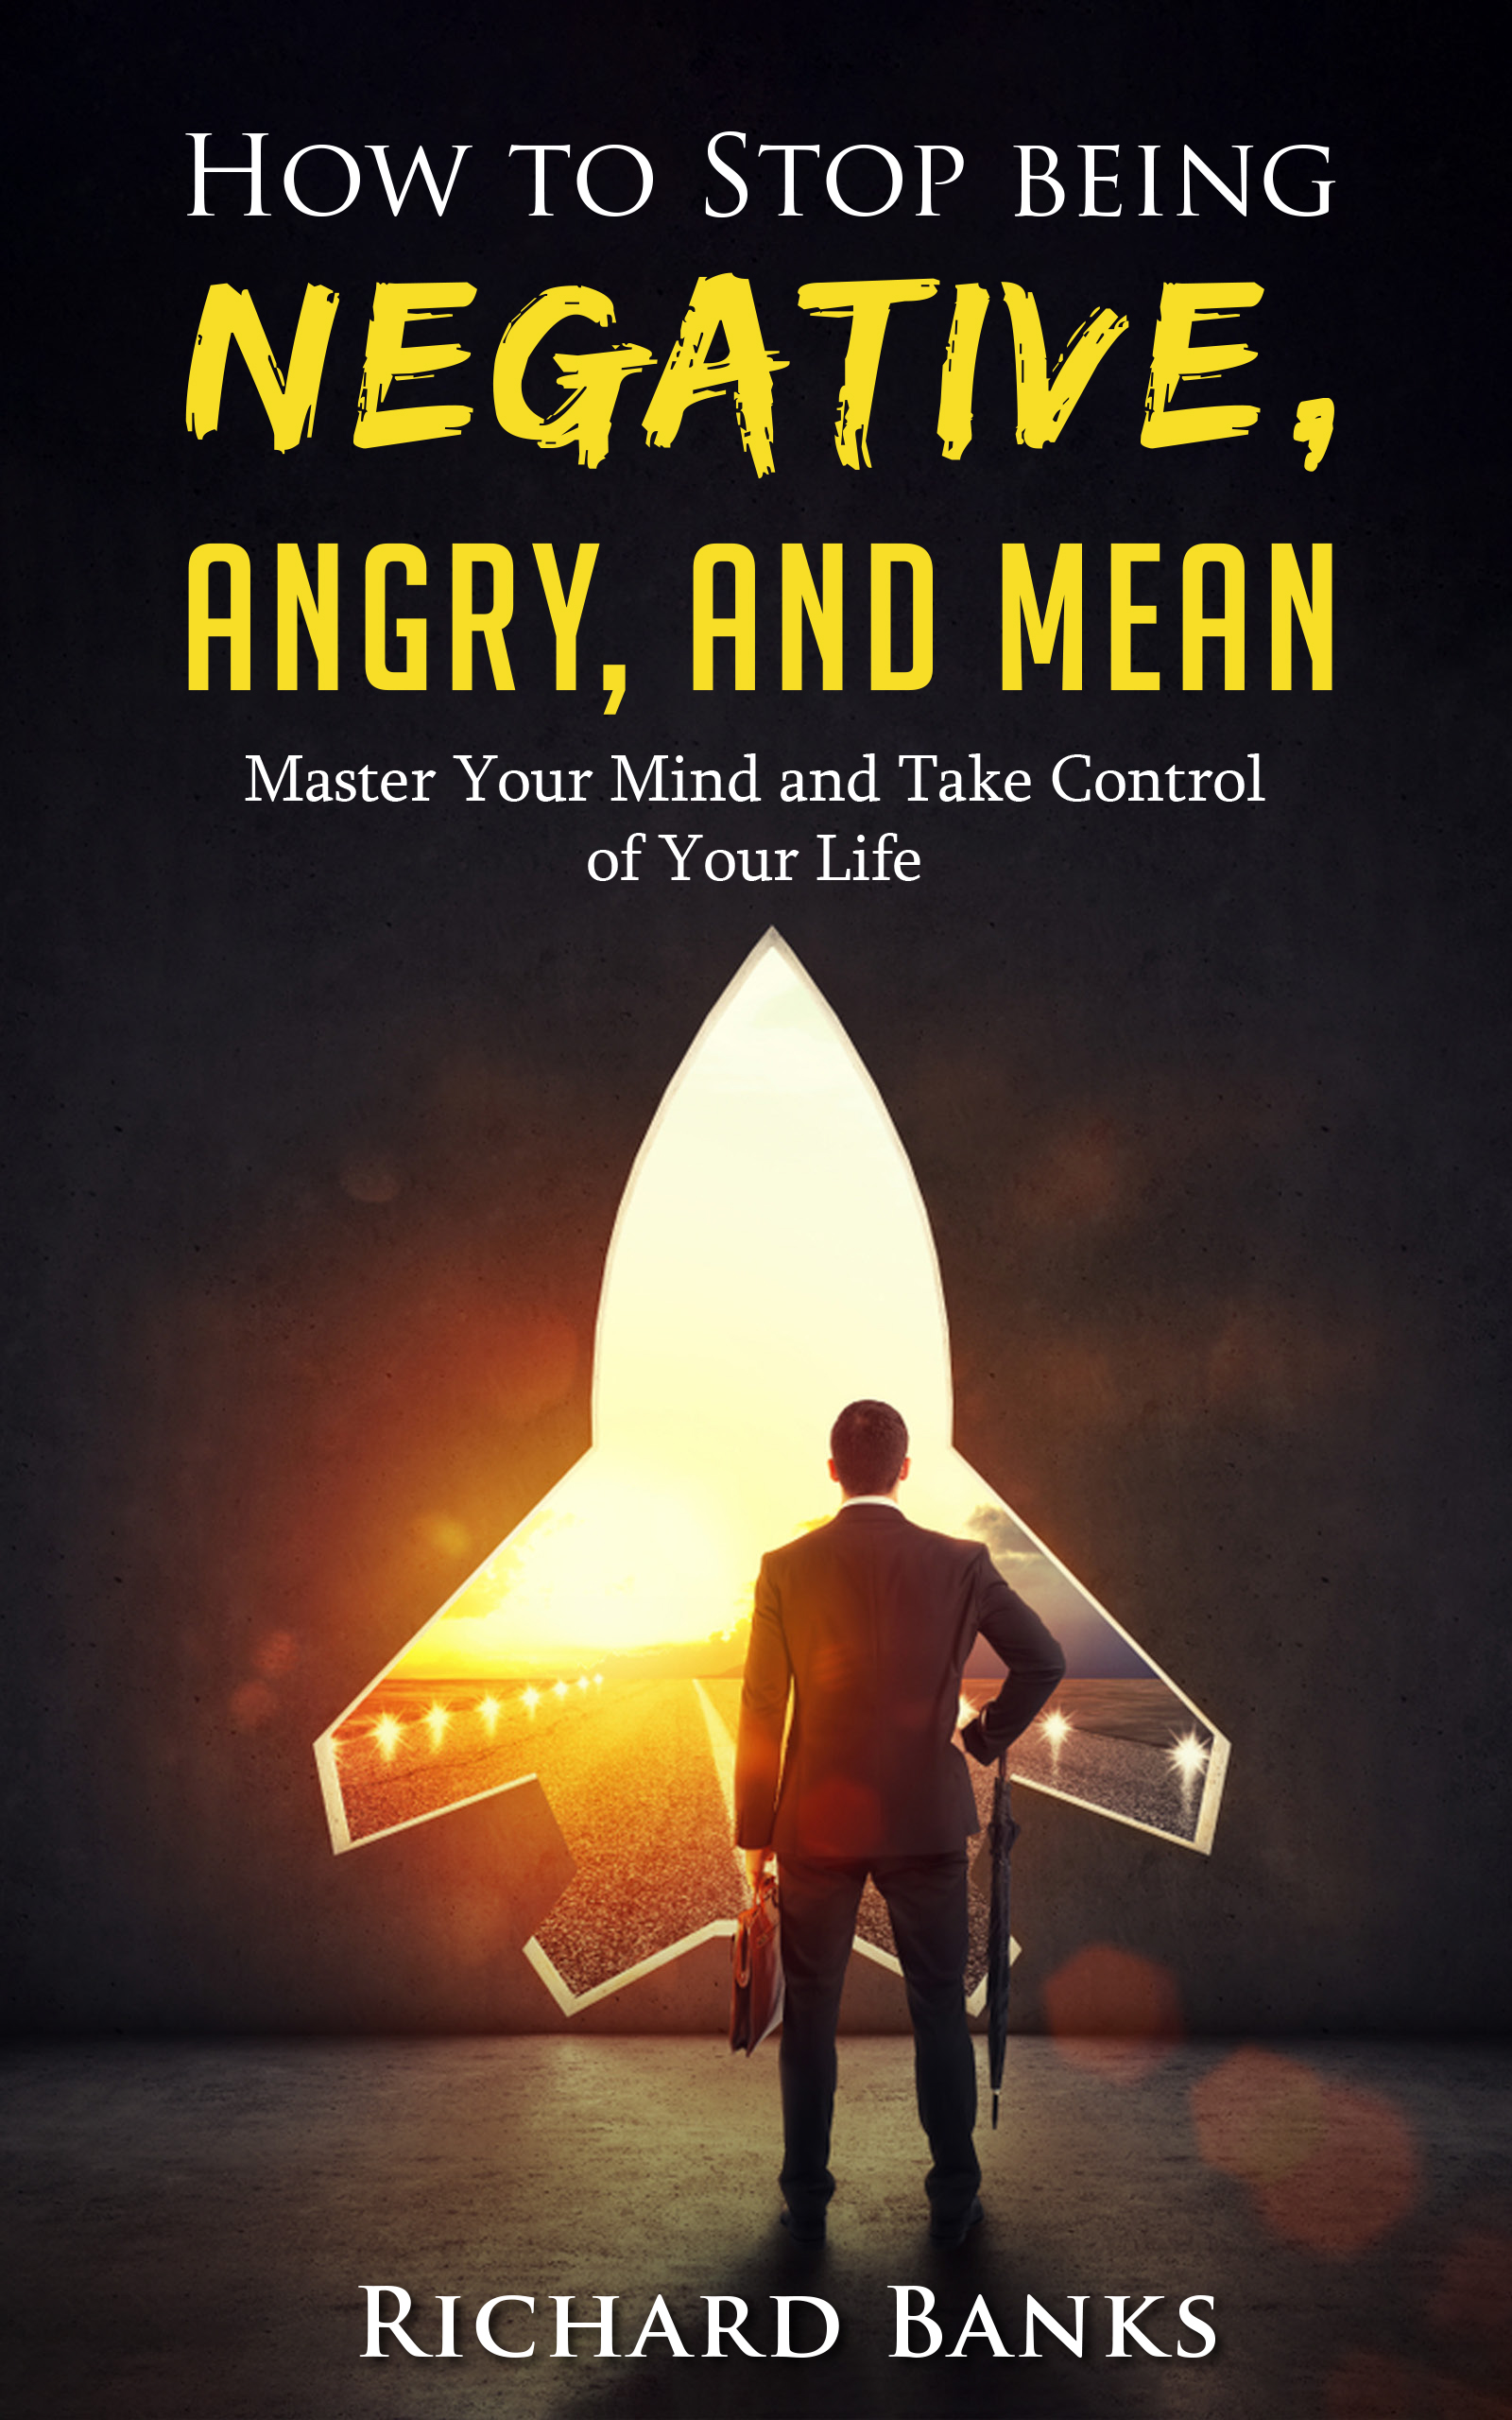 FREE: How to Stop Being Negative, Angry, and Mean: Master Your Mind and Take Control of Your Life by Richard Banks